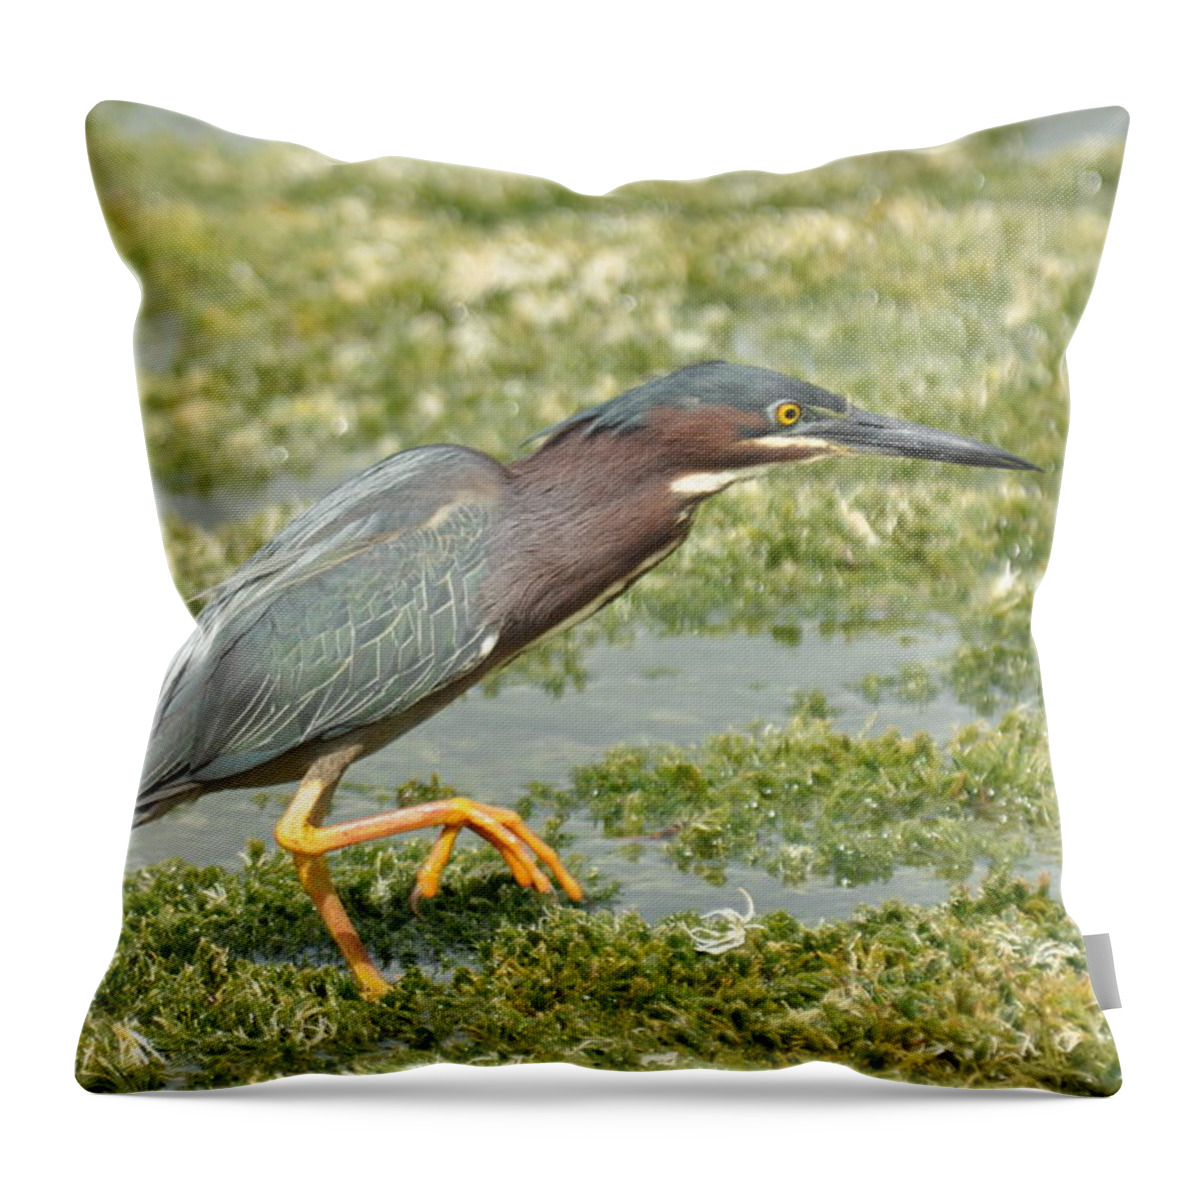 Green Throw Pillow featuring the photograph Still Looking by Frank Madia